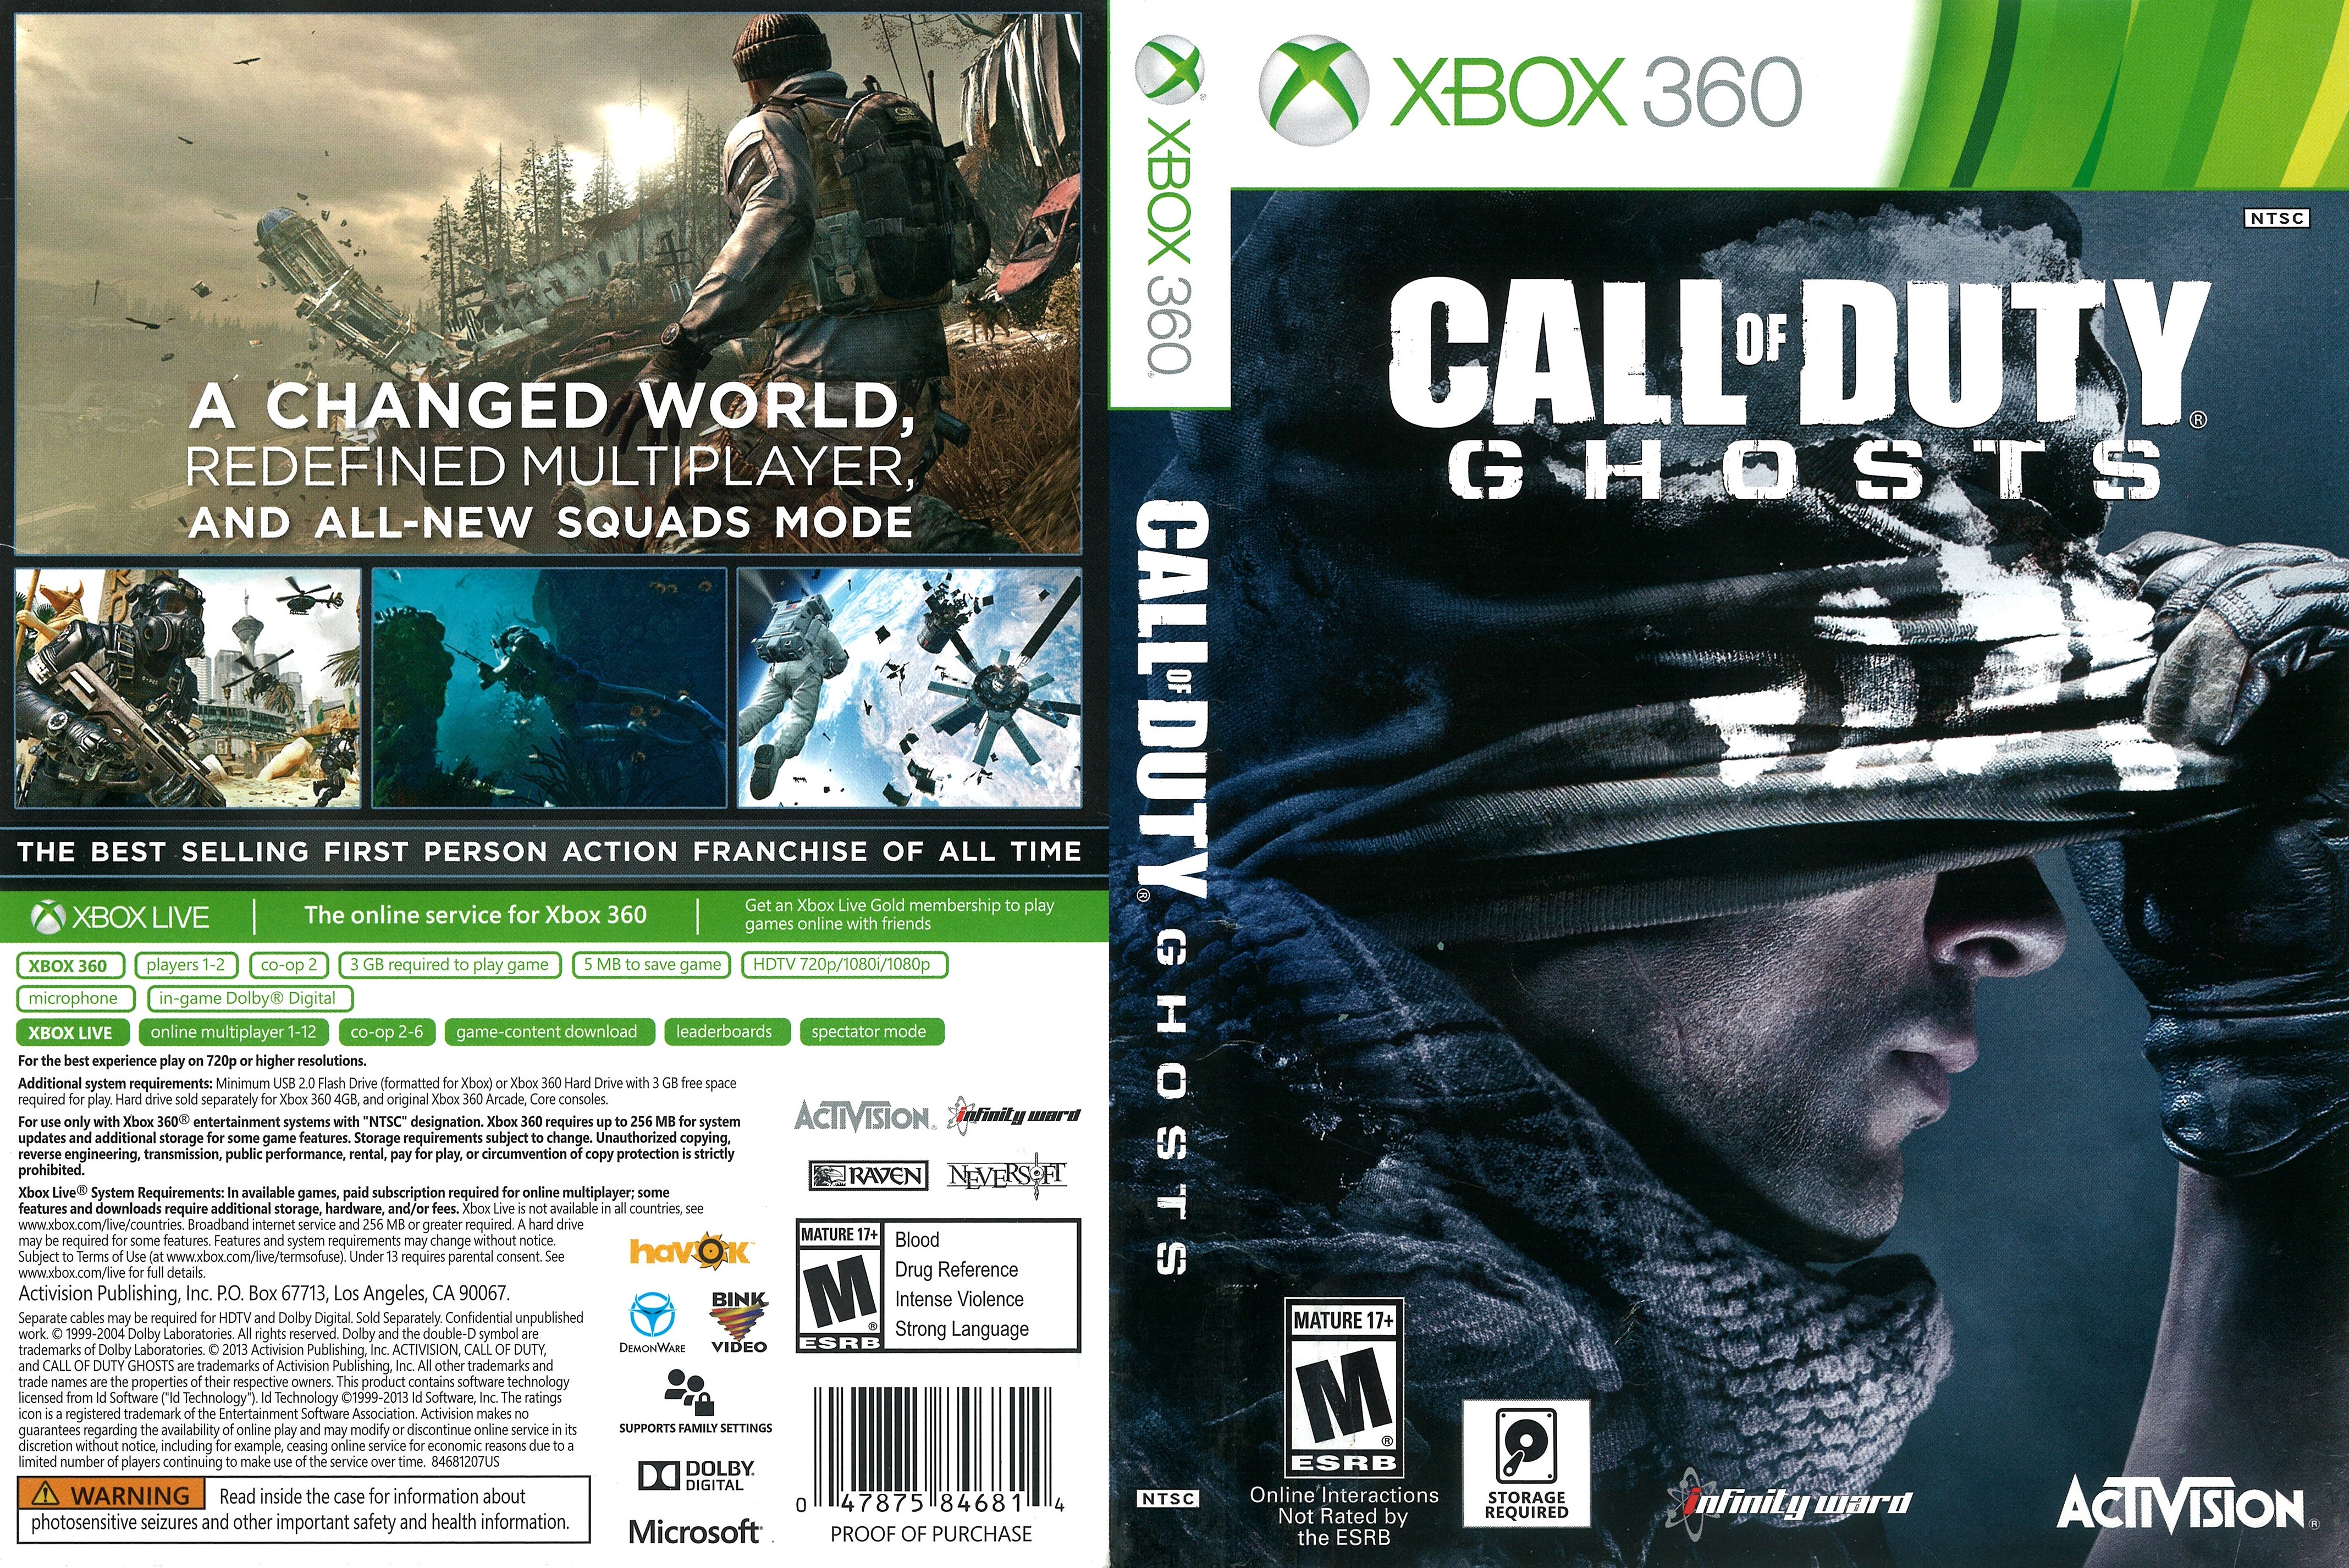 Xbox 360 games download. Call of Duty Ghosts Xbox 360 обложка. Call of Duty 3 Xbox 360 диск. Call of Duty диск на иксбокс 360. Call of Duty диск на Xbox 360.